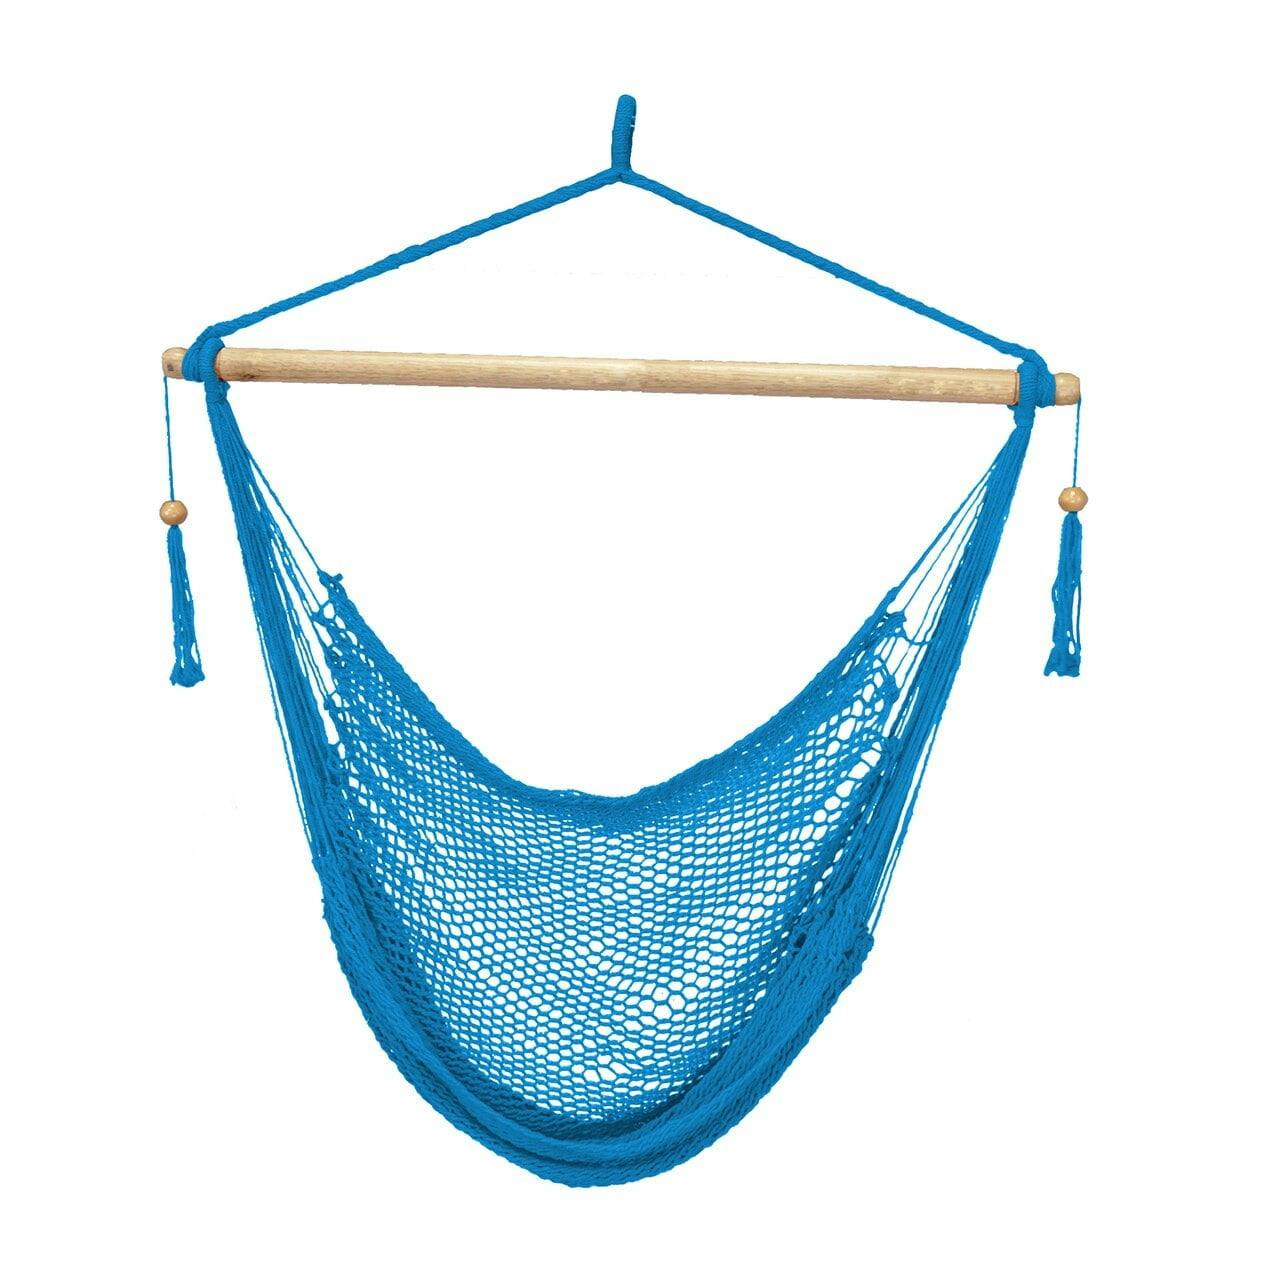 Light Blue Cotton Hammock Chair with Tassels and Braided Rope